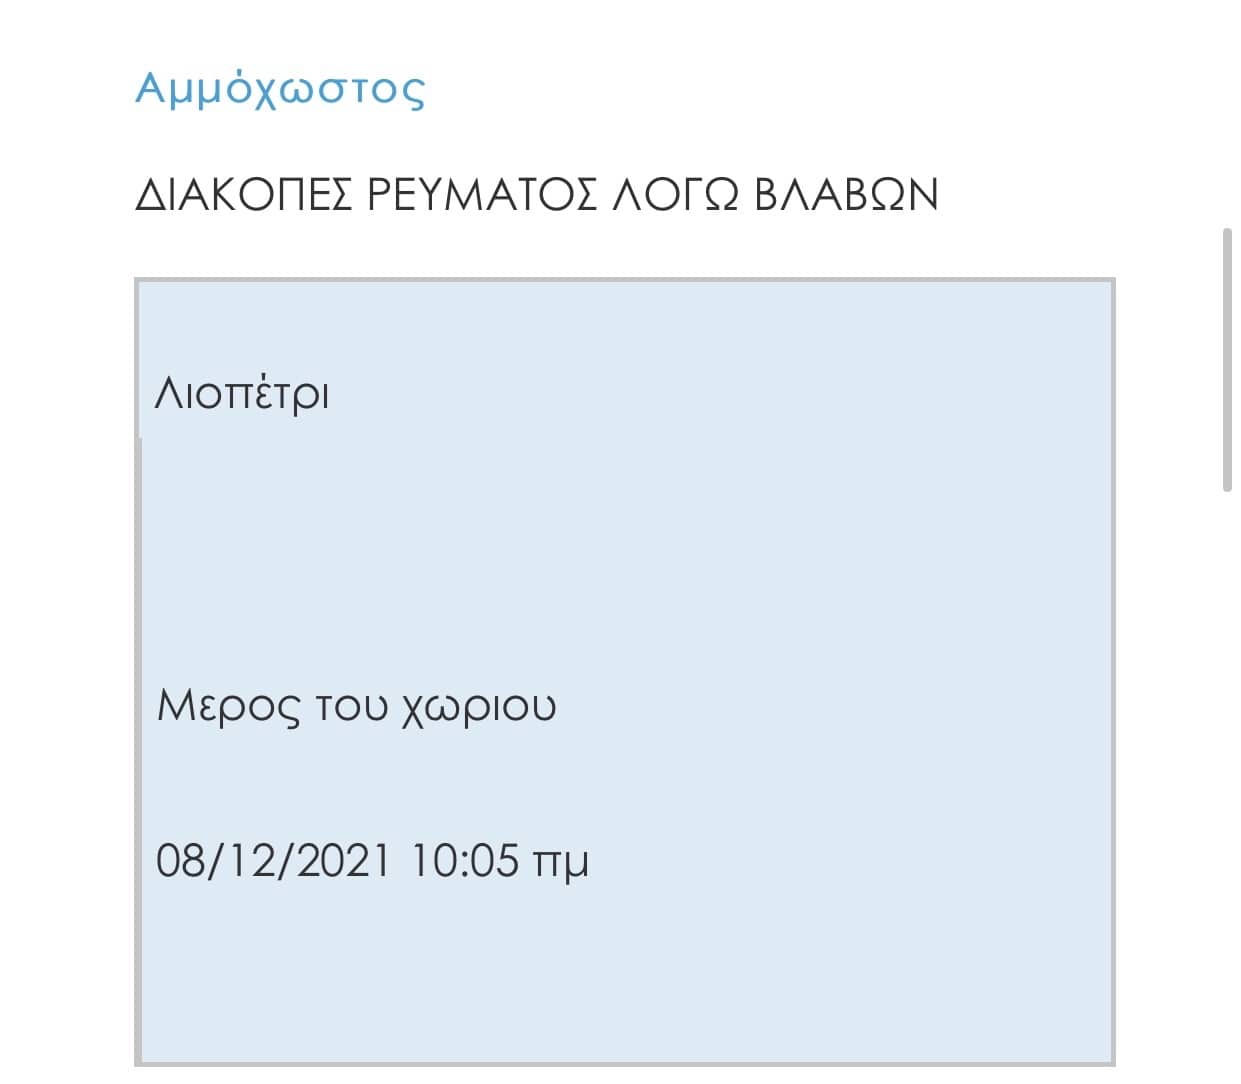 viber image 2021 12 08 10 56 32 972 exclusive, Rainfall, Power Outage, Cyprus